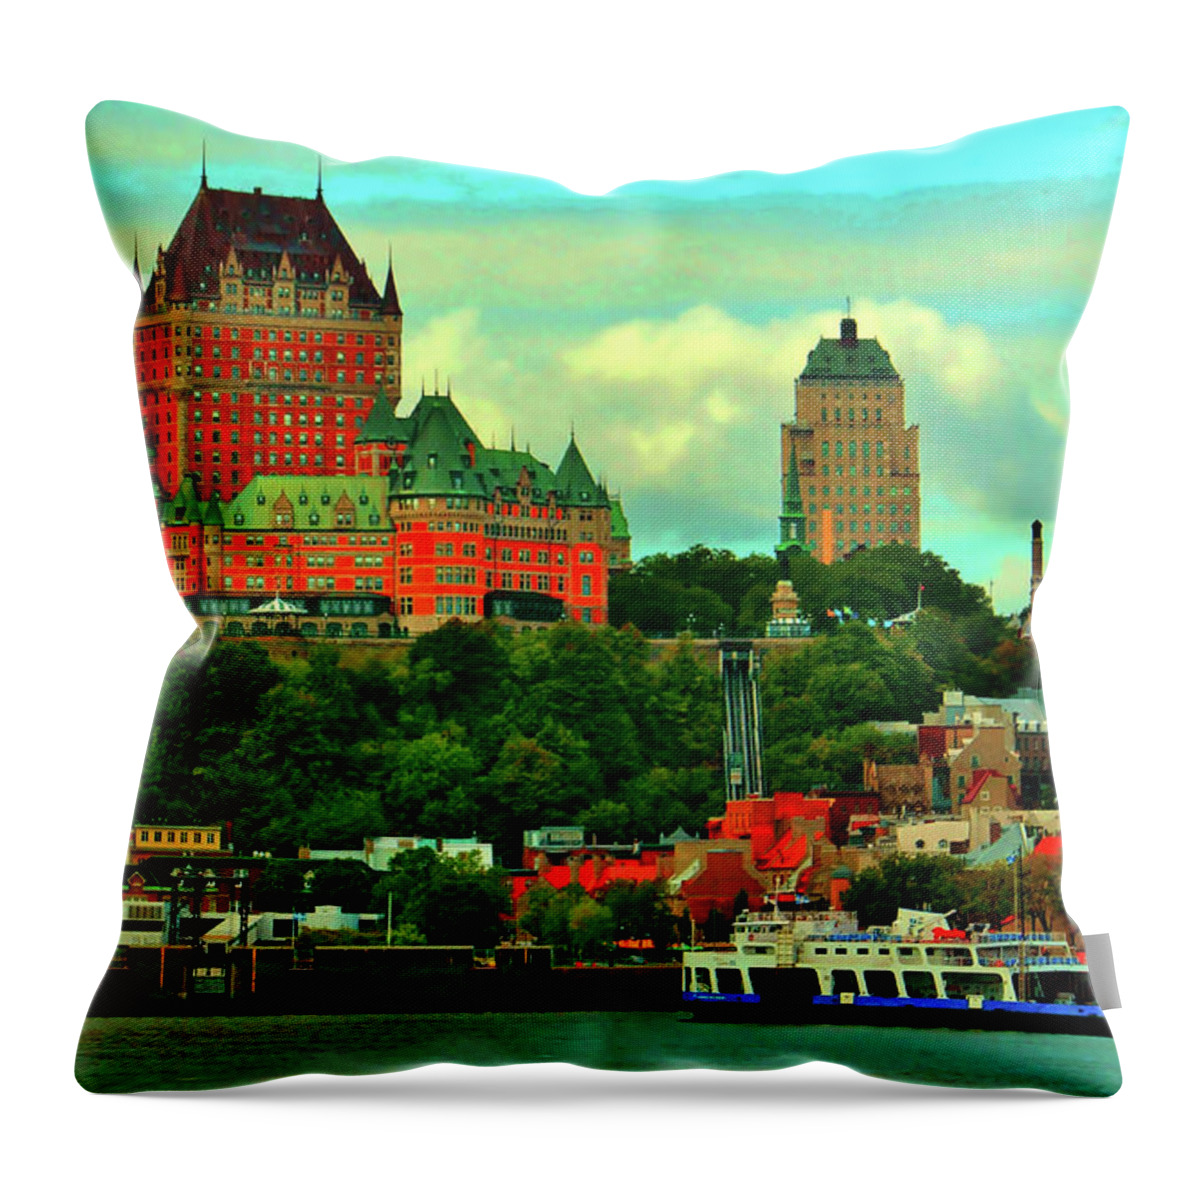 Summer Throw Pillow featuring the mixed media Ferry Ride Summer Day by William Rockwell